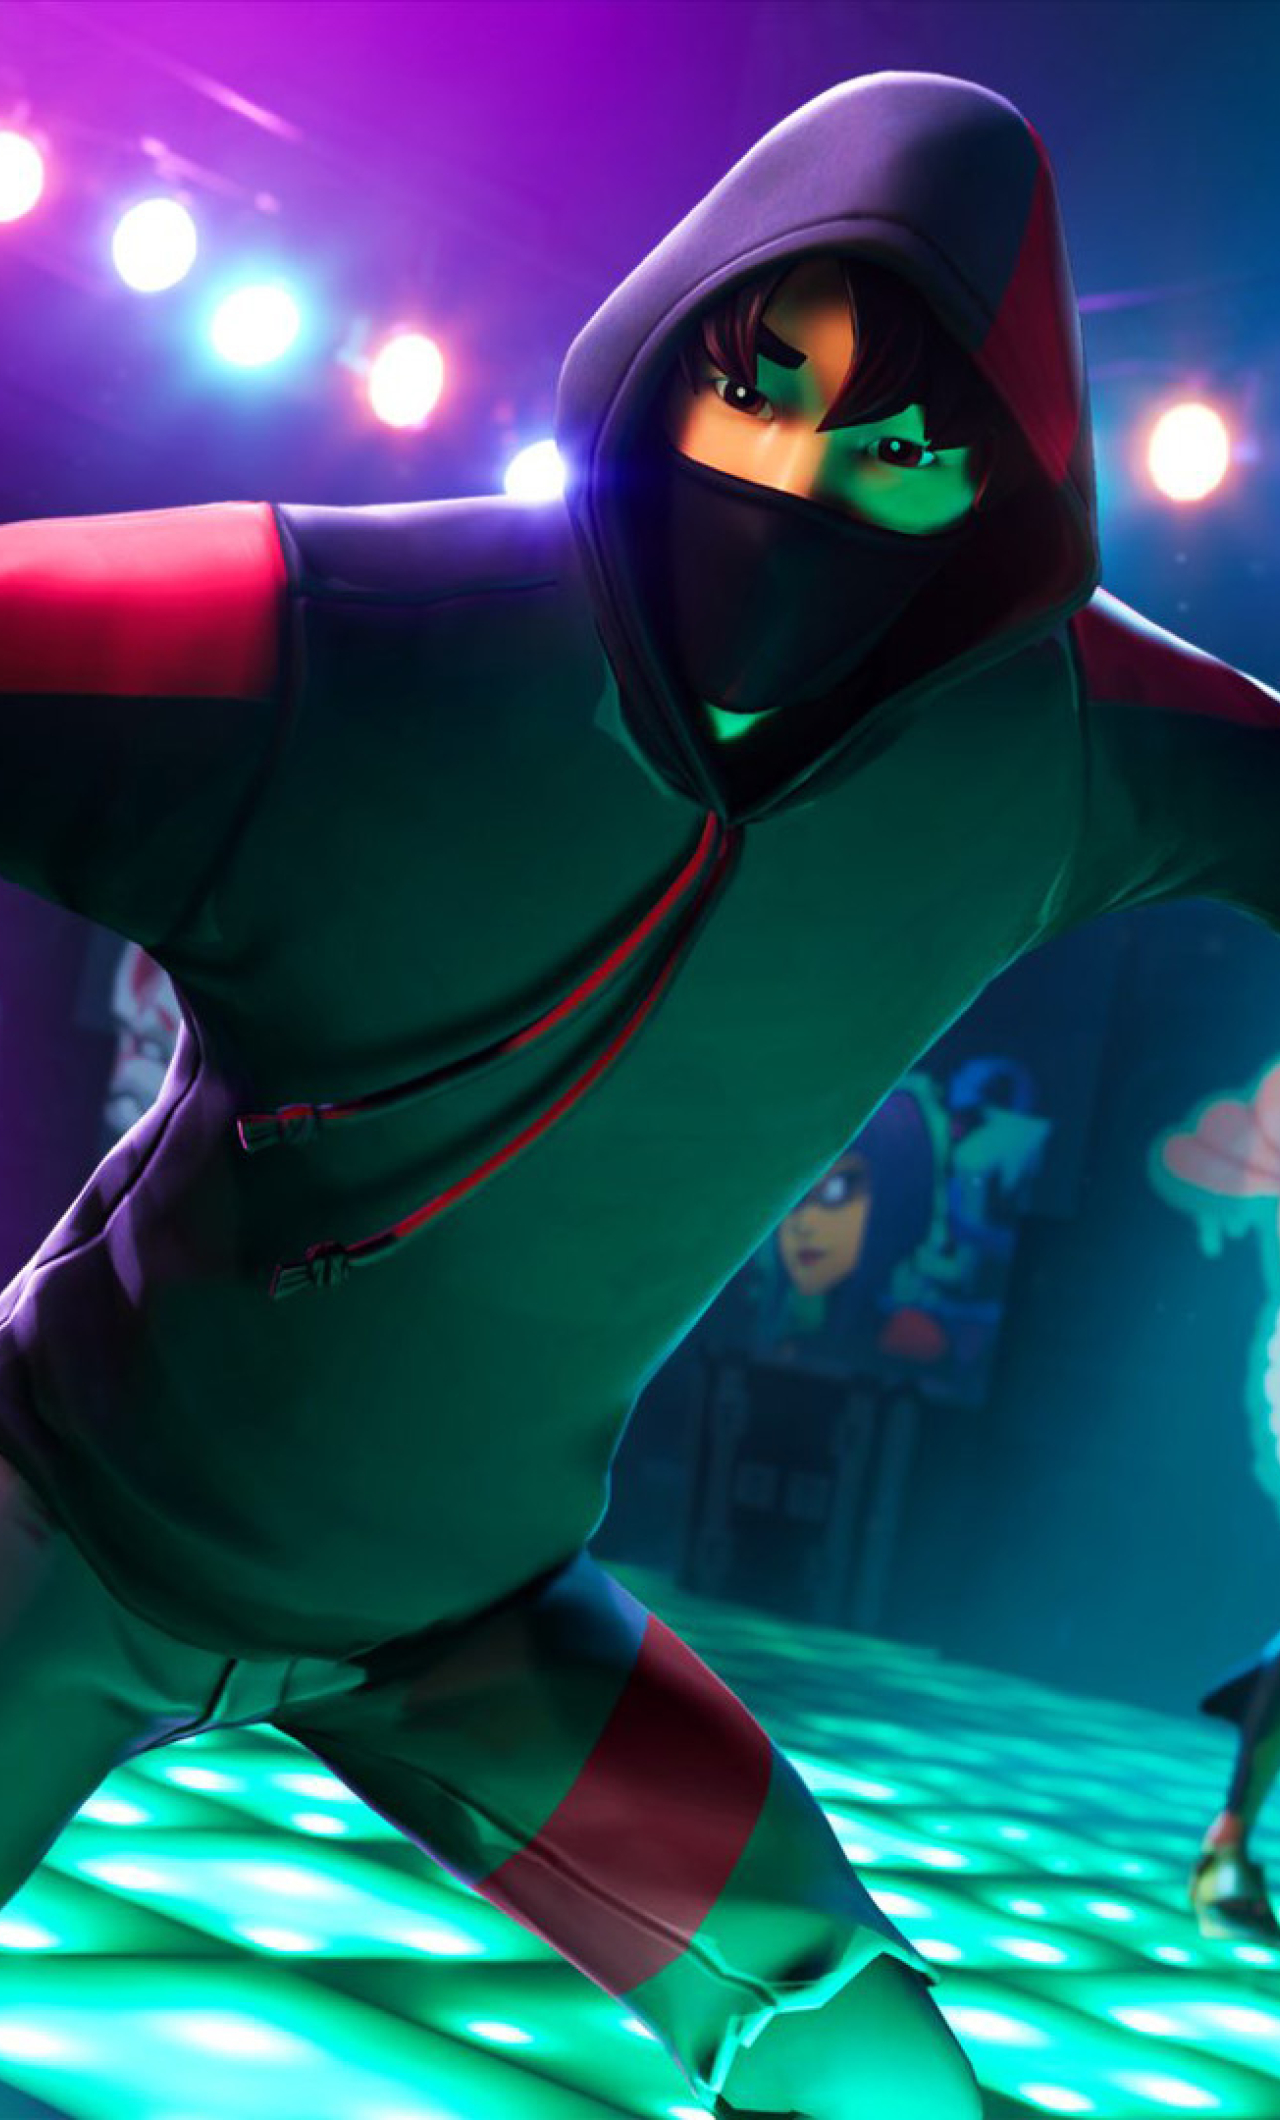 1280x2120 Ikonik New Fortnite Iphone 6 Plus Wallpaper Hd Games 4k Wallpapers Images Photos And Background Wallpapers Den